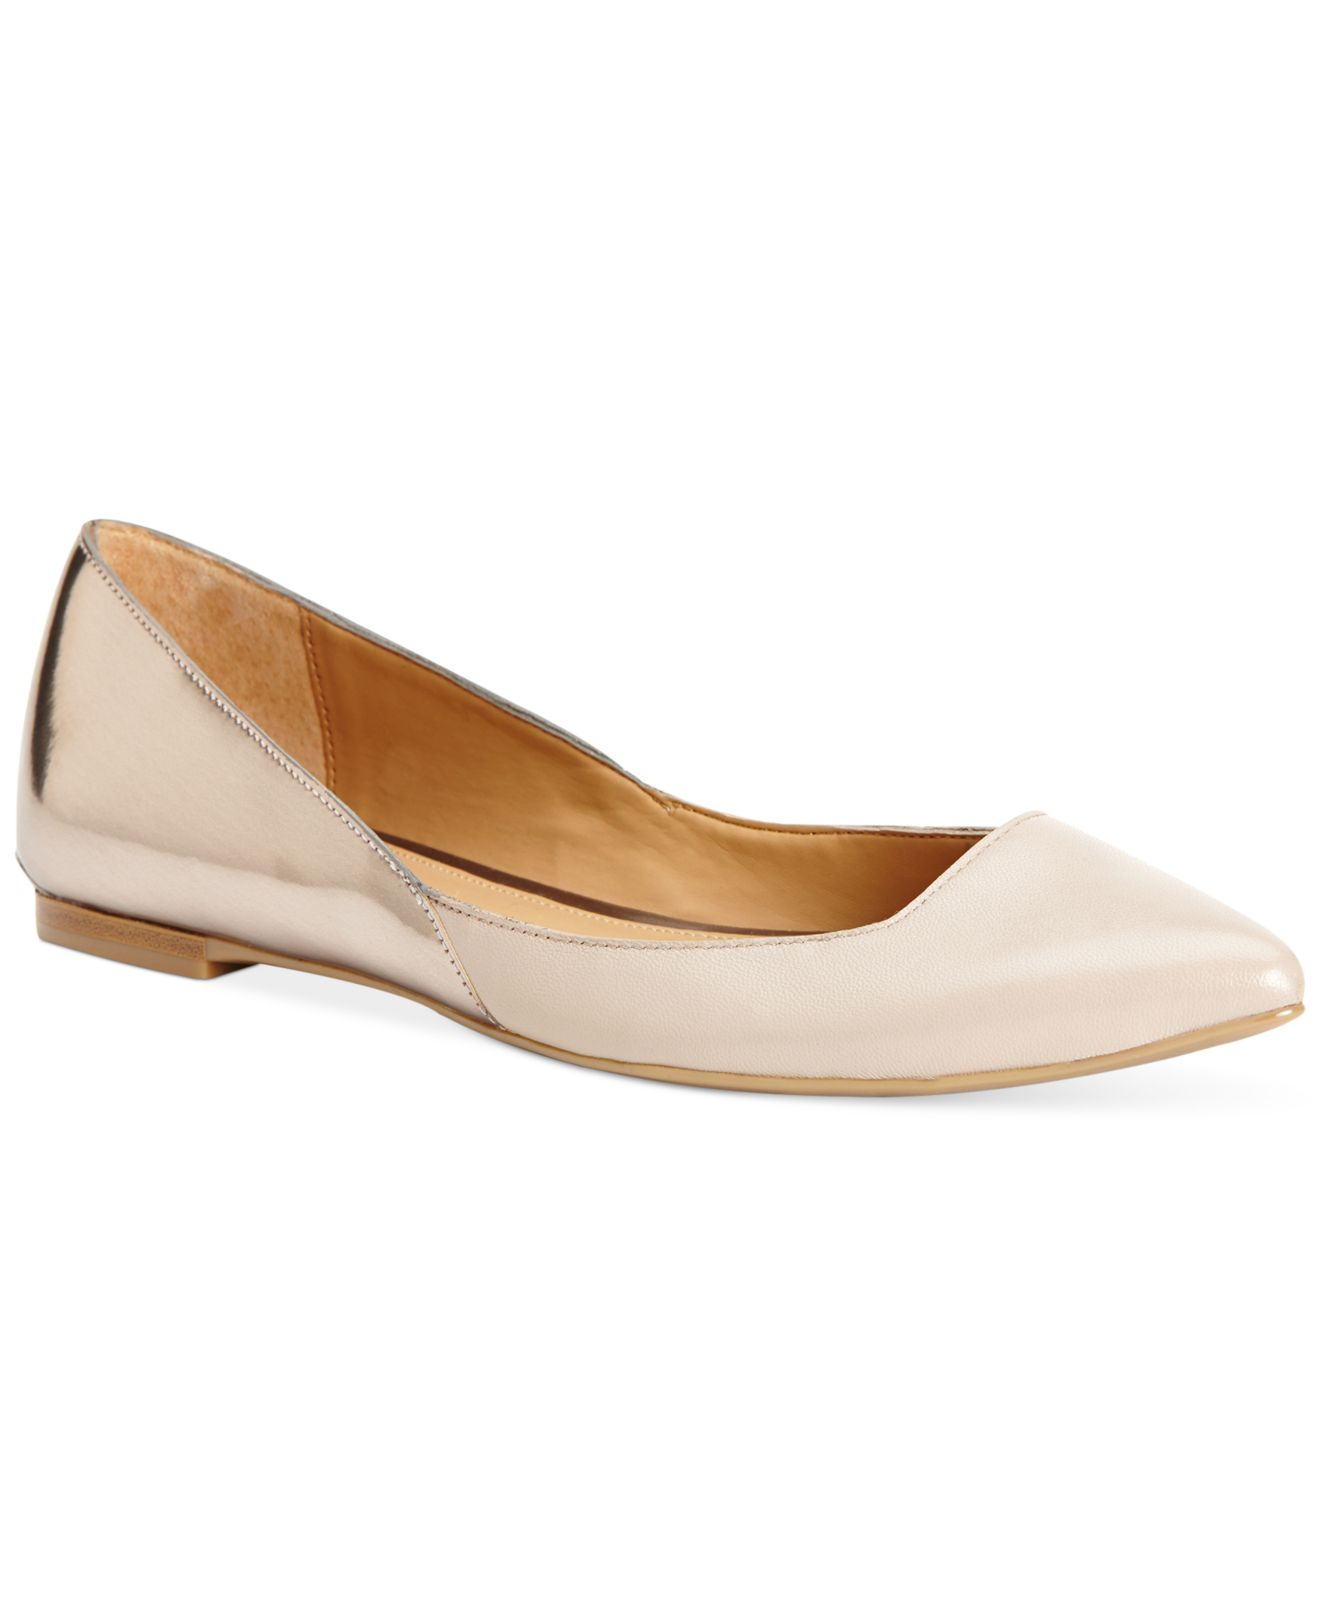 Calvin Klein Women'S Galice Pointed Toe Flats in Natural | Lyst